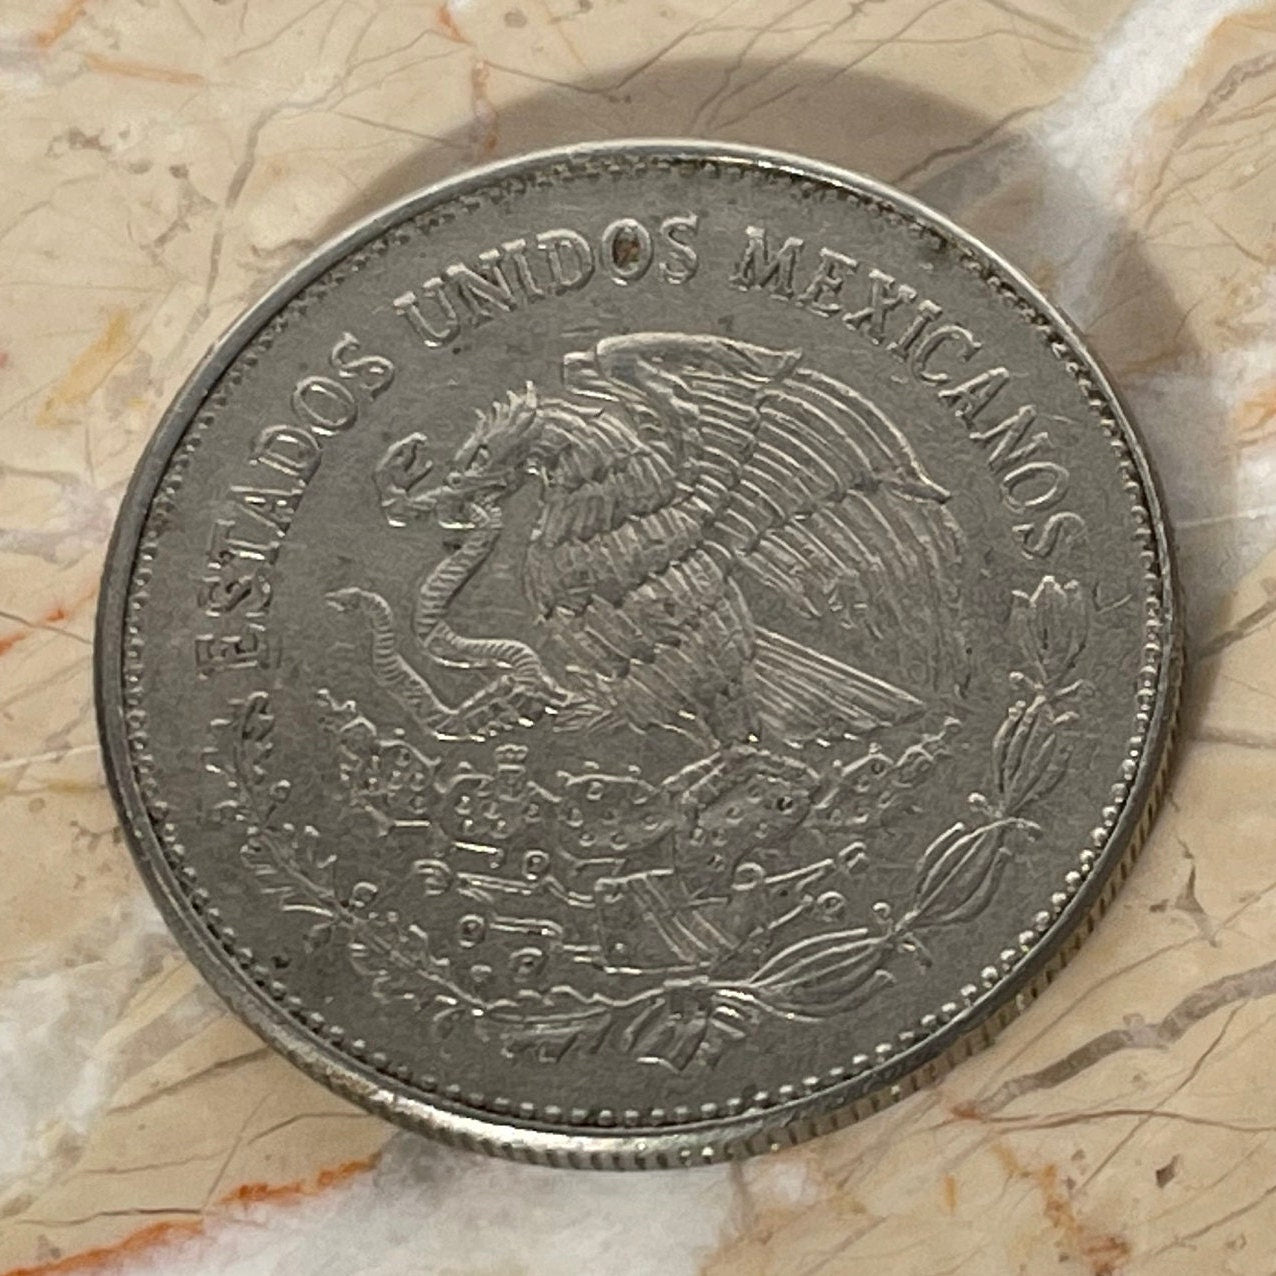 Eagle with Snake & Moon Goddess 50 Pesos Mexico Authentic Coin Money for Jewelry and Craft Making